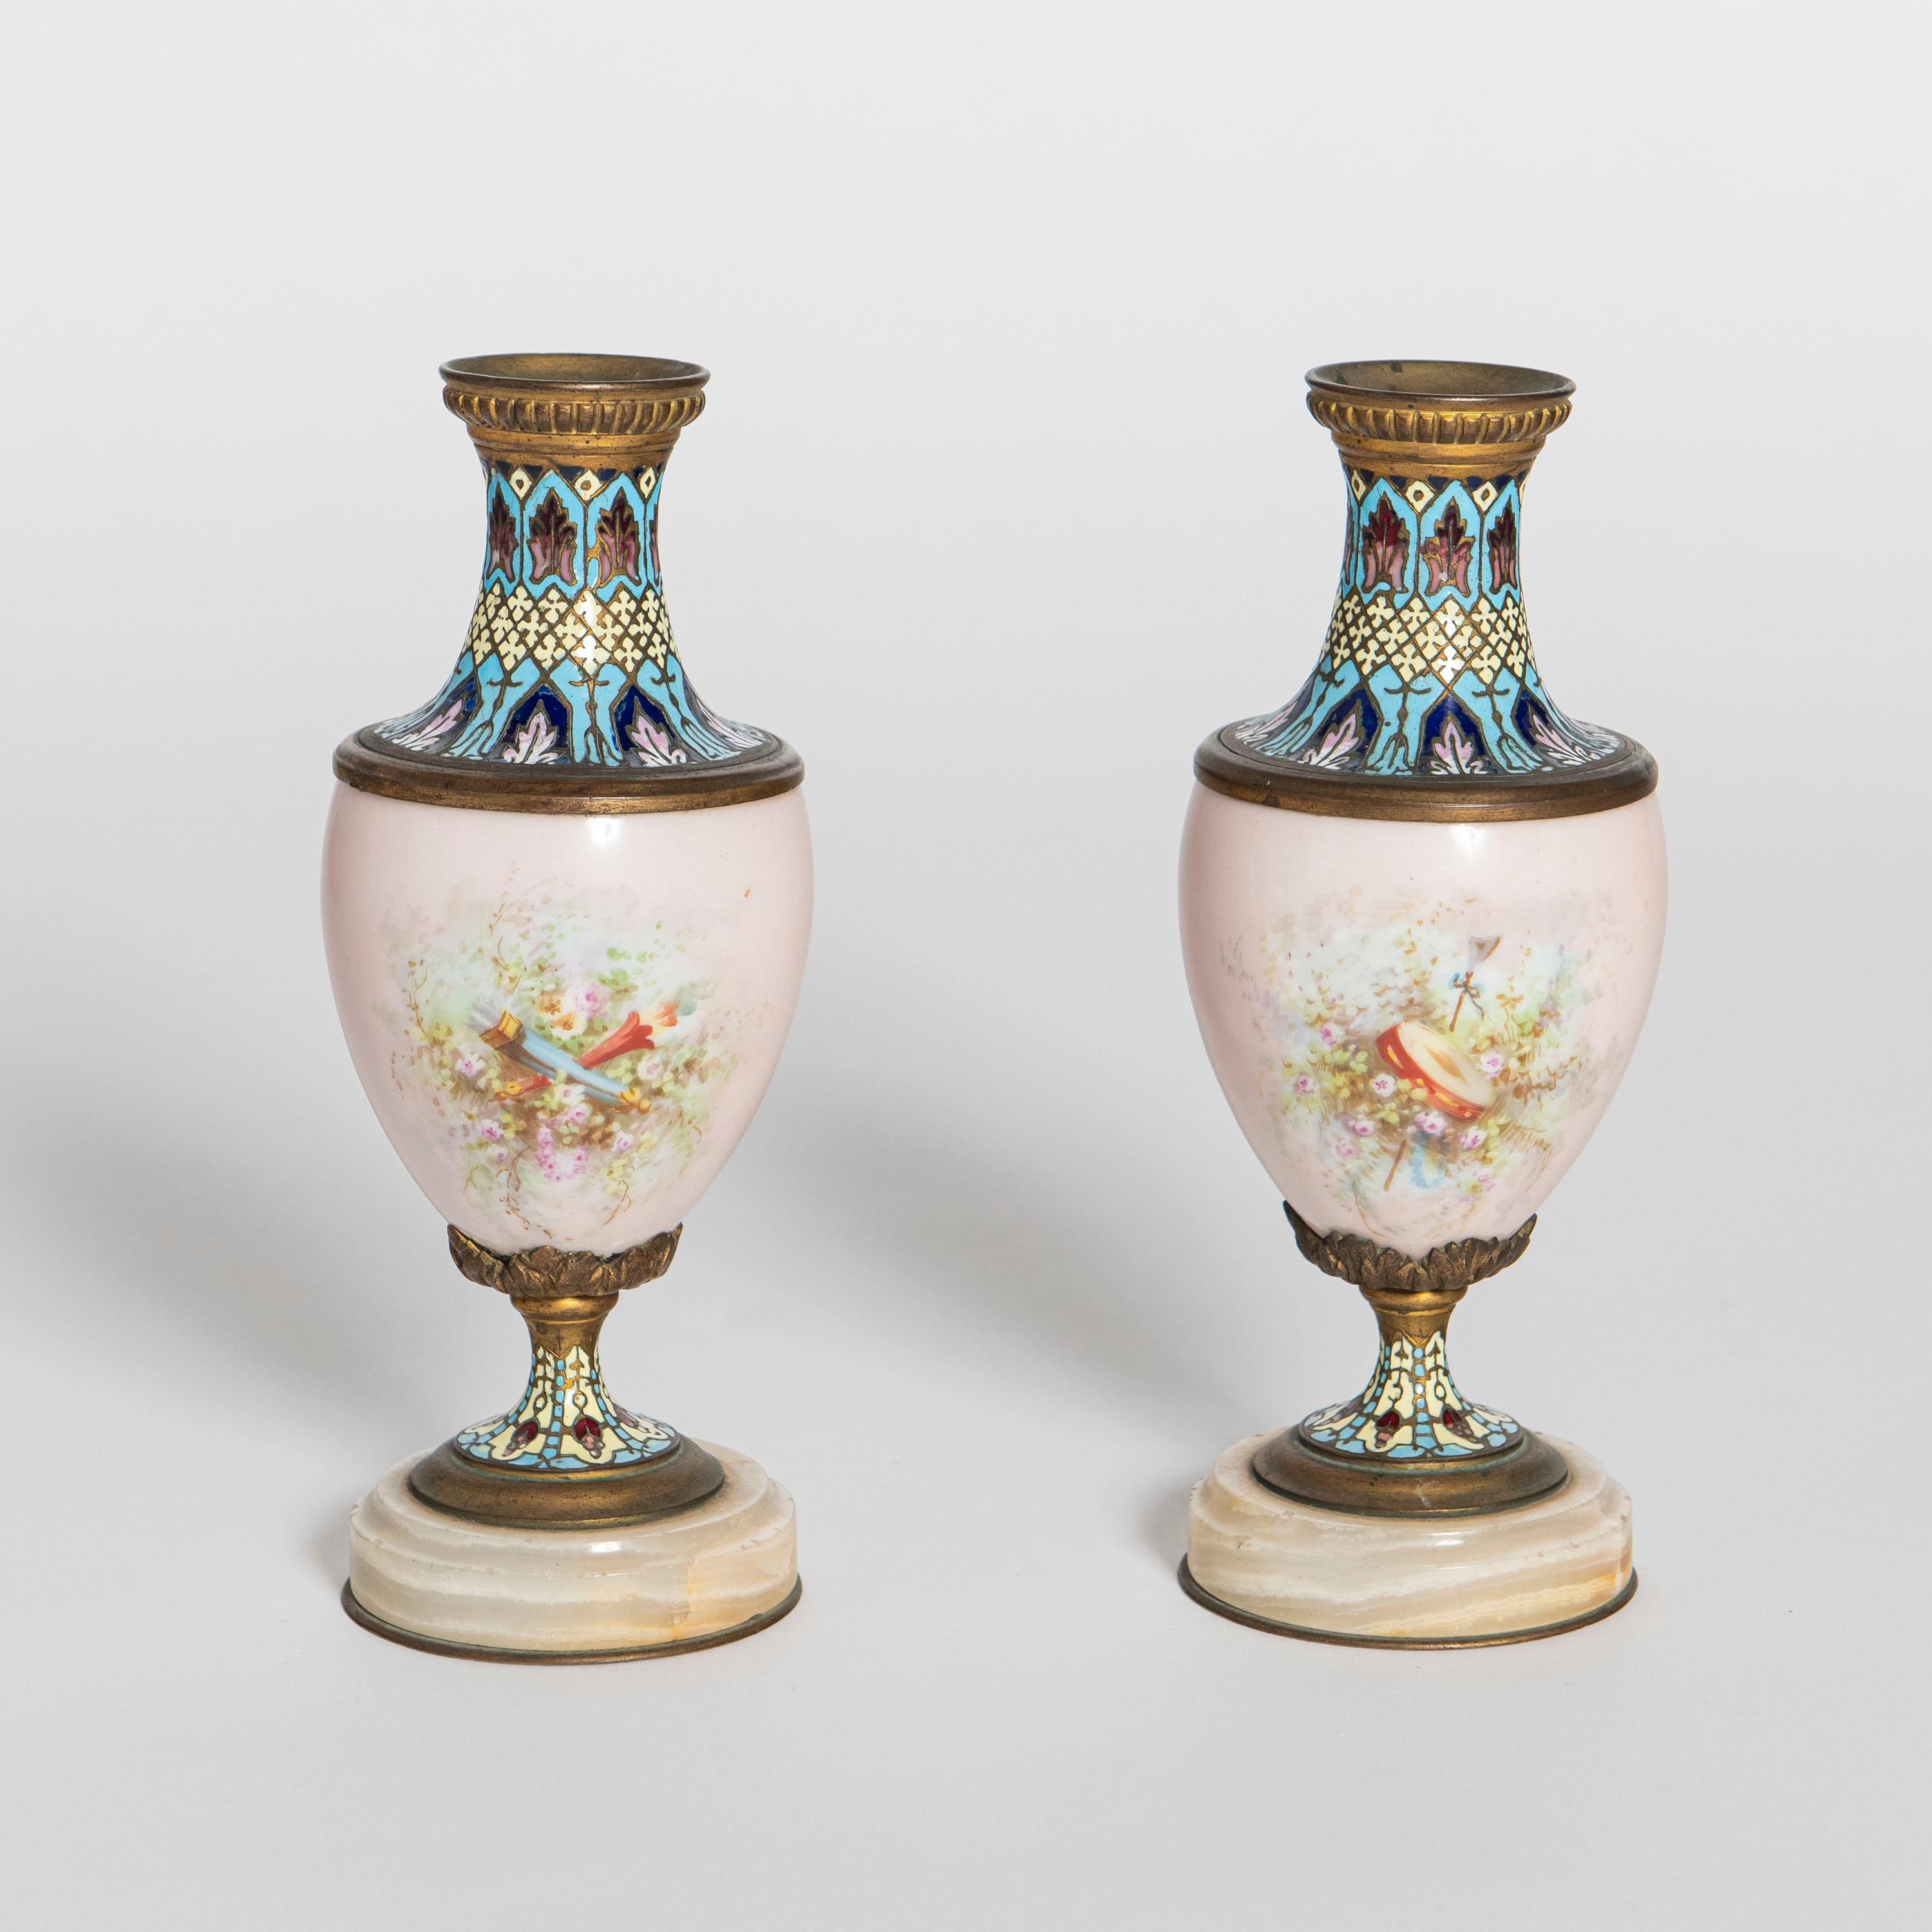 Pair of porcelain, cloisonné, marble and bronze vases. France, early 20th century.